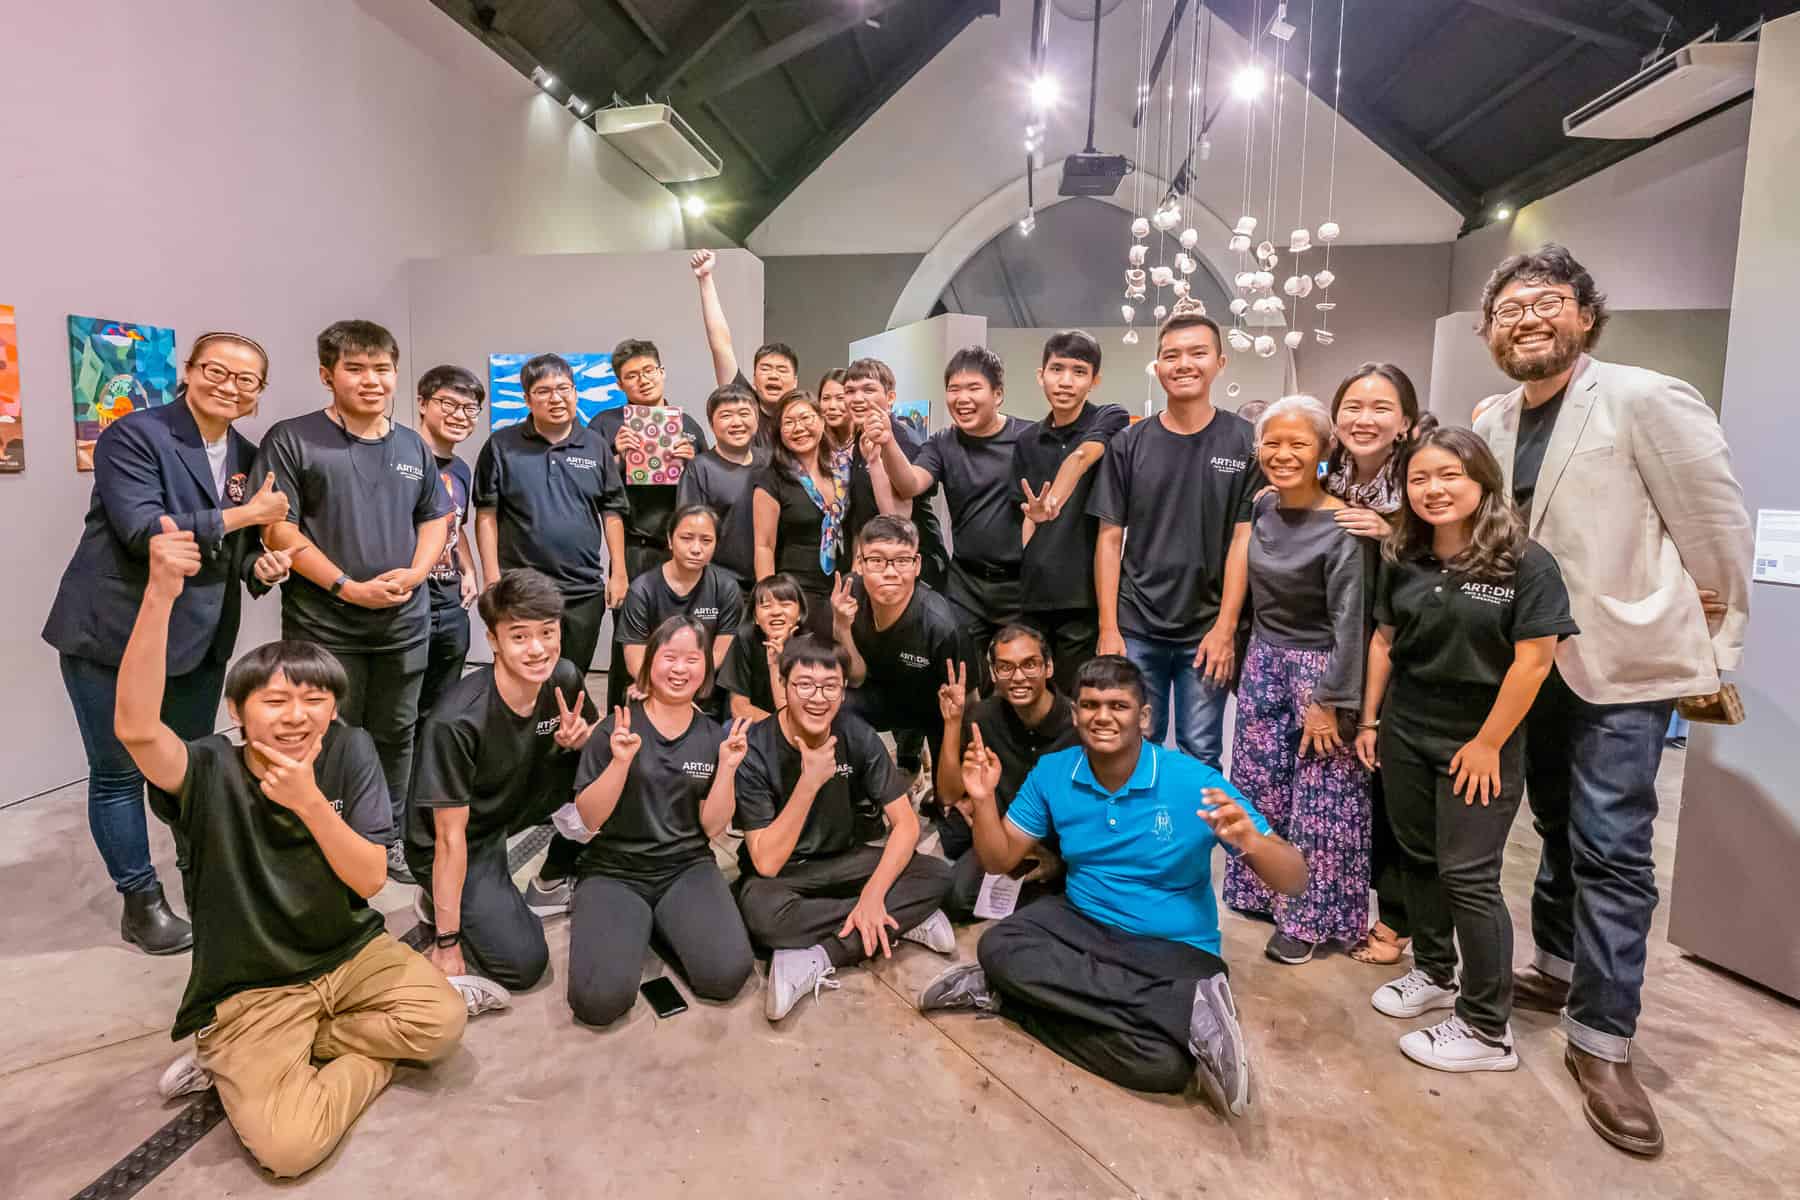 Curator John Tung (far right) poses with the young artists who are part of the exhibition A Piece Of Home. Image credit: ART:DIS Singapore.